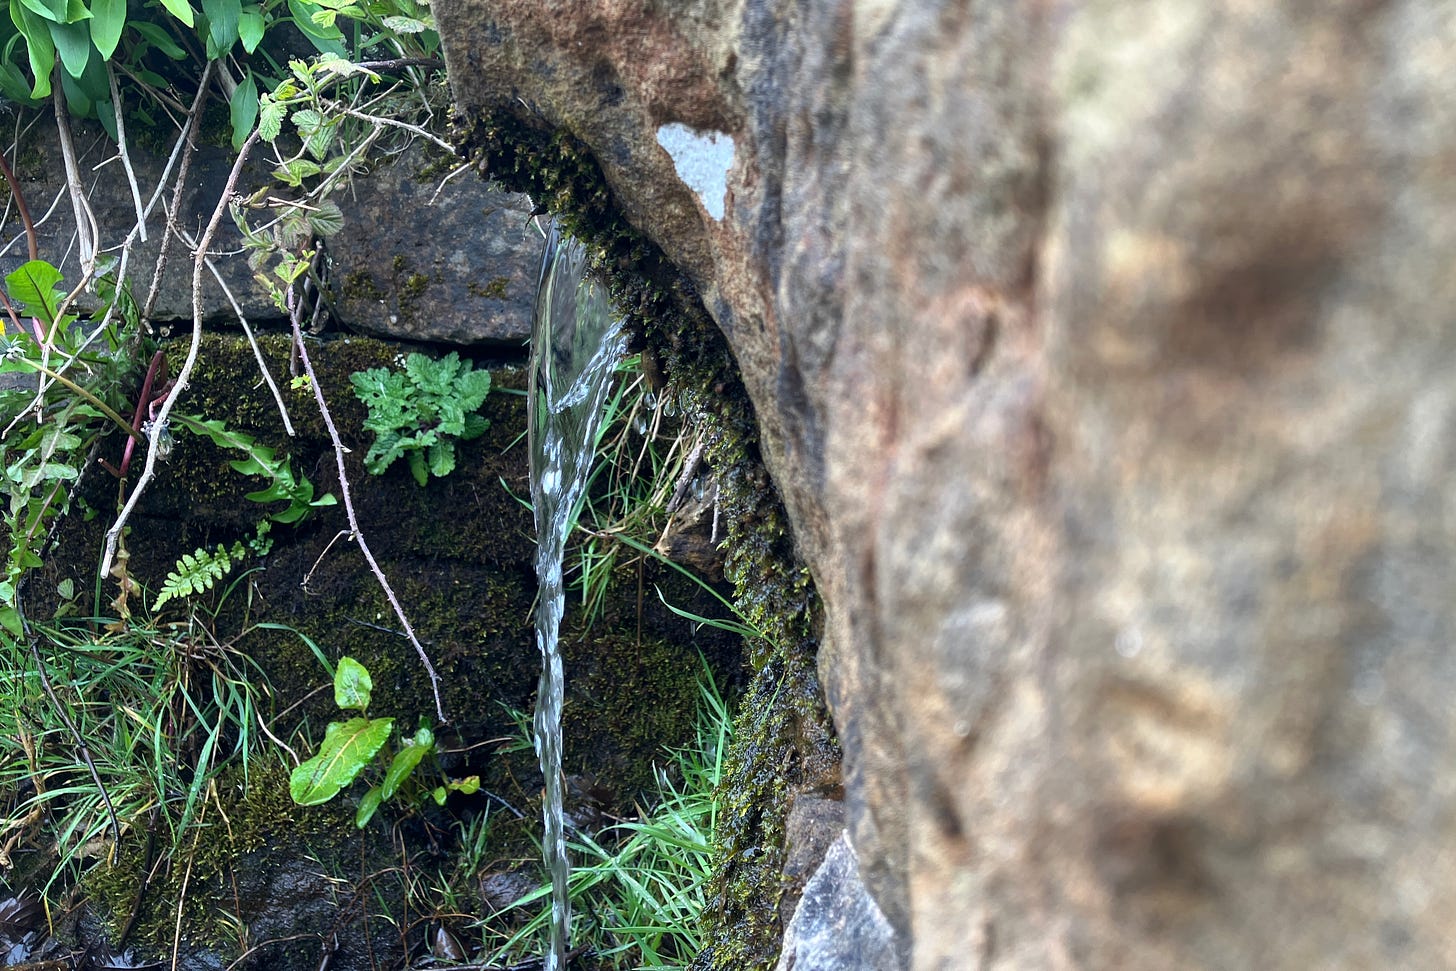 Water trickles from stone trough